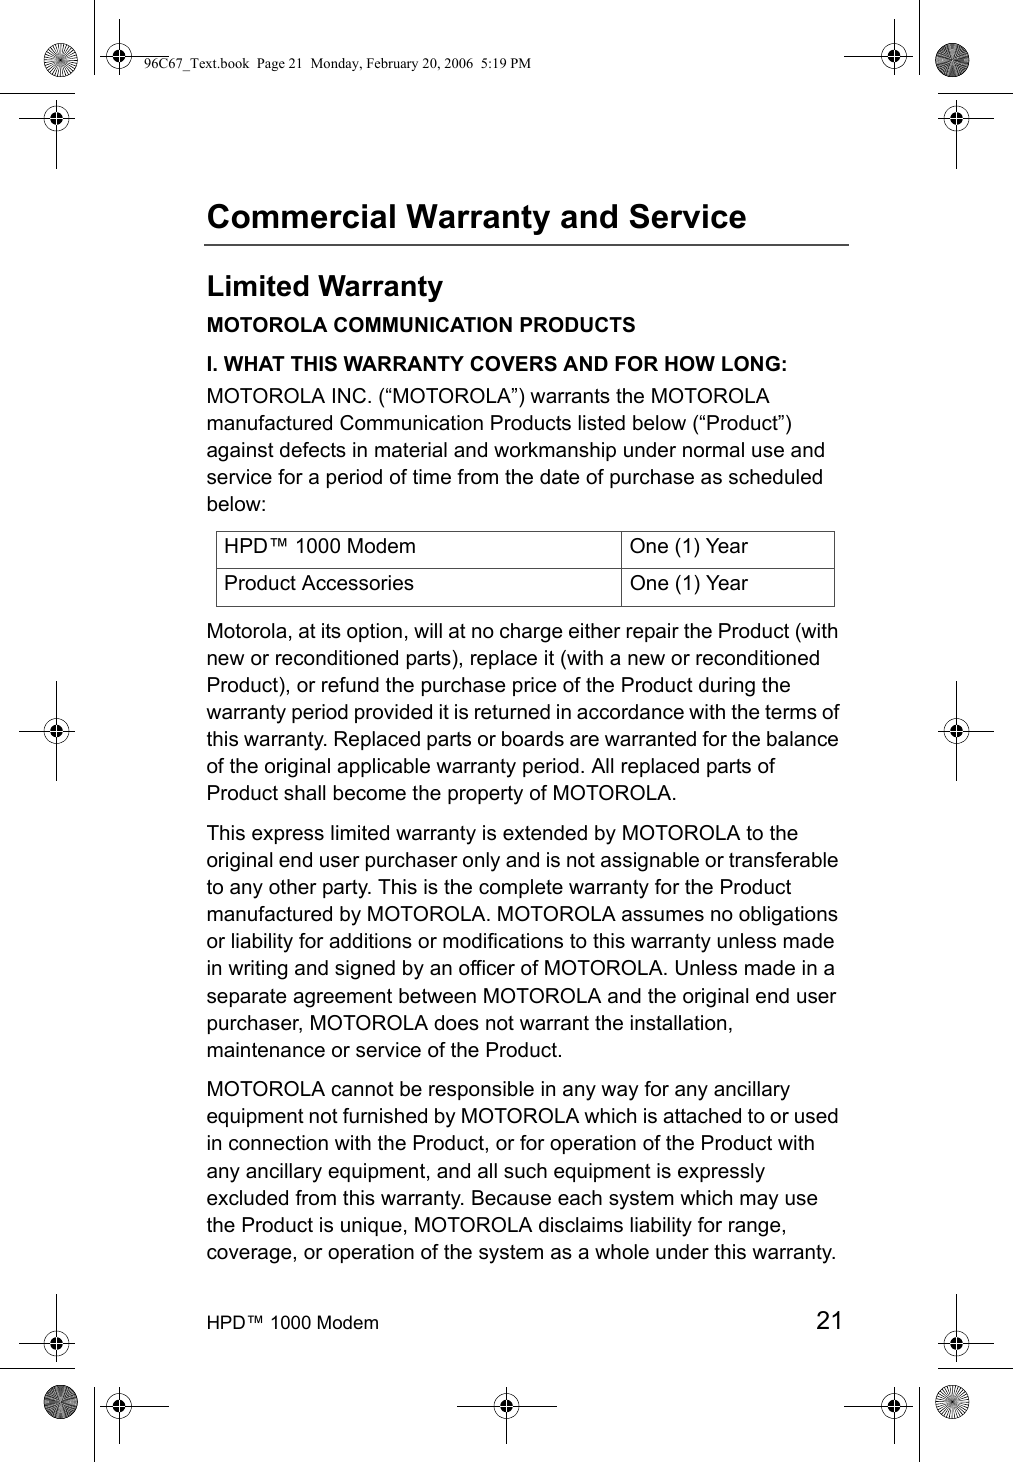 HPD™ 1000 Modem 21Commercial Warranty and ServiceLimited WarrantyMOTOROLA COMMUNICATION PRODUCTSI. WHAT THIS WARRANTY COVERS AND FOR HOW LONG:MOTOROLA INC. (“MOTOROLA”) warrants the MOTOROLA manufactured Communication Products listed below (“Product”) against defects in material and workmanship under normal use and service for a period of time from the date of purchase as scheduled below:Motorola, at its option, will at no charge either repair the Product (with new or reconditioned parts), replace it (with a new or reconditioned Product), or refund the purchase price of the Product during the warranty period provided it is returned in accordance with the terms of this warranty. Replaced parts or boards are warranted for the balance of the original applicable warranty period. All replaced parts of Product shall become the property of MOTOROLA.This express limited warranty is extended by MOTOROLA to the original end user purchaser only and is not assignable or transferable to any other party. This is the complete warranty for the Product manufactured by MOTOROLA. MOTOROLA assumes no obligations or liability for additions or modifications to this warranty unless made in writing and signed by an officer of MOTOROLA. Unless made in a separate agreement between MOTOROLA and the original end user purchaser, MOTOROLA does not warrant the installation, maintenance or service of the Product.MOTOROLA cannot be responsible in any way for any ancillary equipment not furnished by MOTOROLA which is attached to or used in connection with the Product, or for operation of the Product with any ancillary equipment, and all such equipment is expressly excluded from this warranty. Because each system which may use the Product is unique, MOTOROLA disclaims liability for range, coverage, or operation of the system as a whole under this warranty.HPD™ 1000 Modem One (1) YearProduct Accessories One (1) Year96C67_Text.book  Page 21  Monday, February 20, 2006  5:19 PM